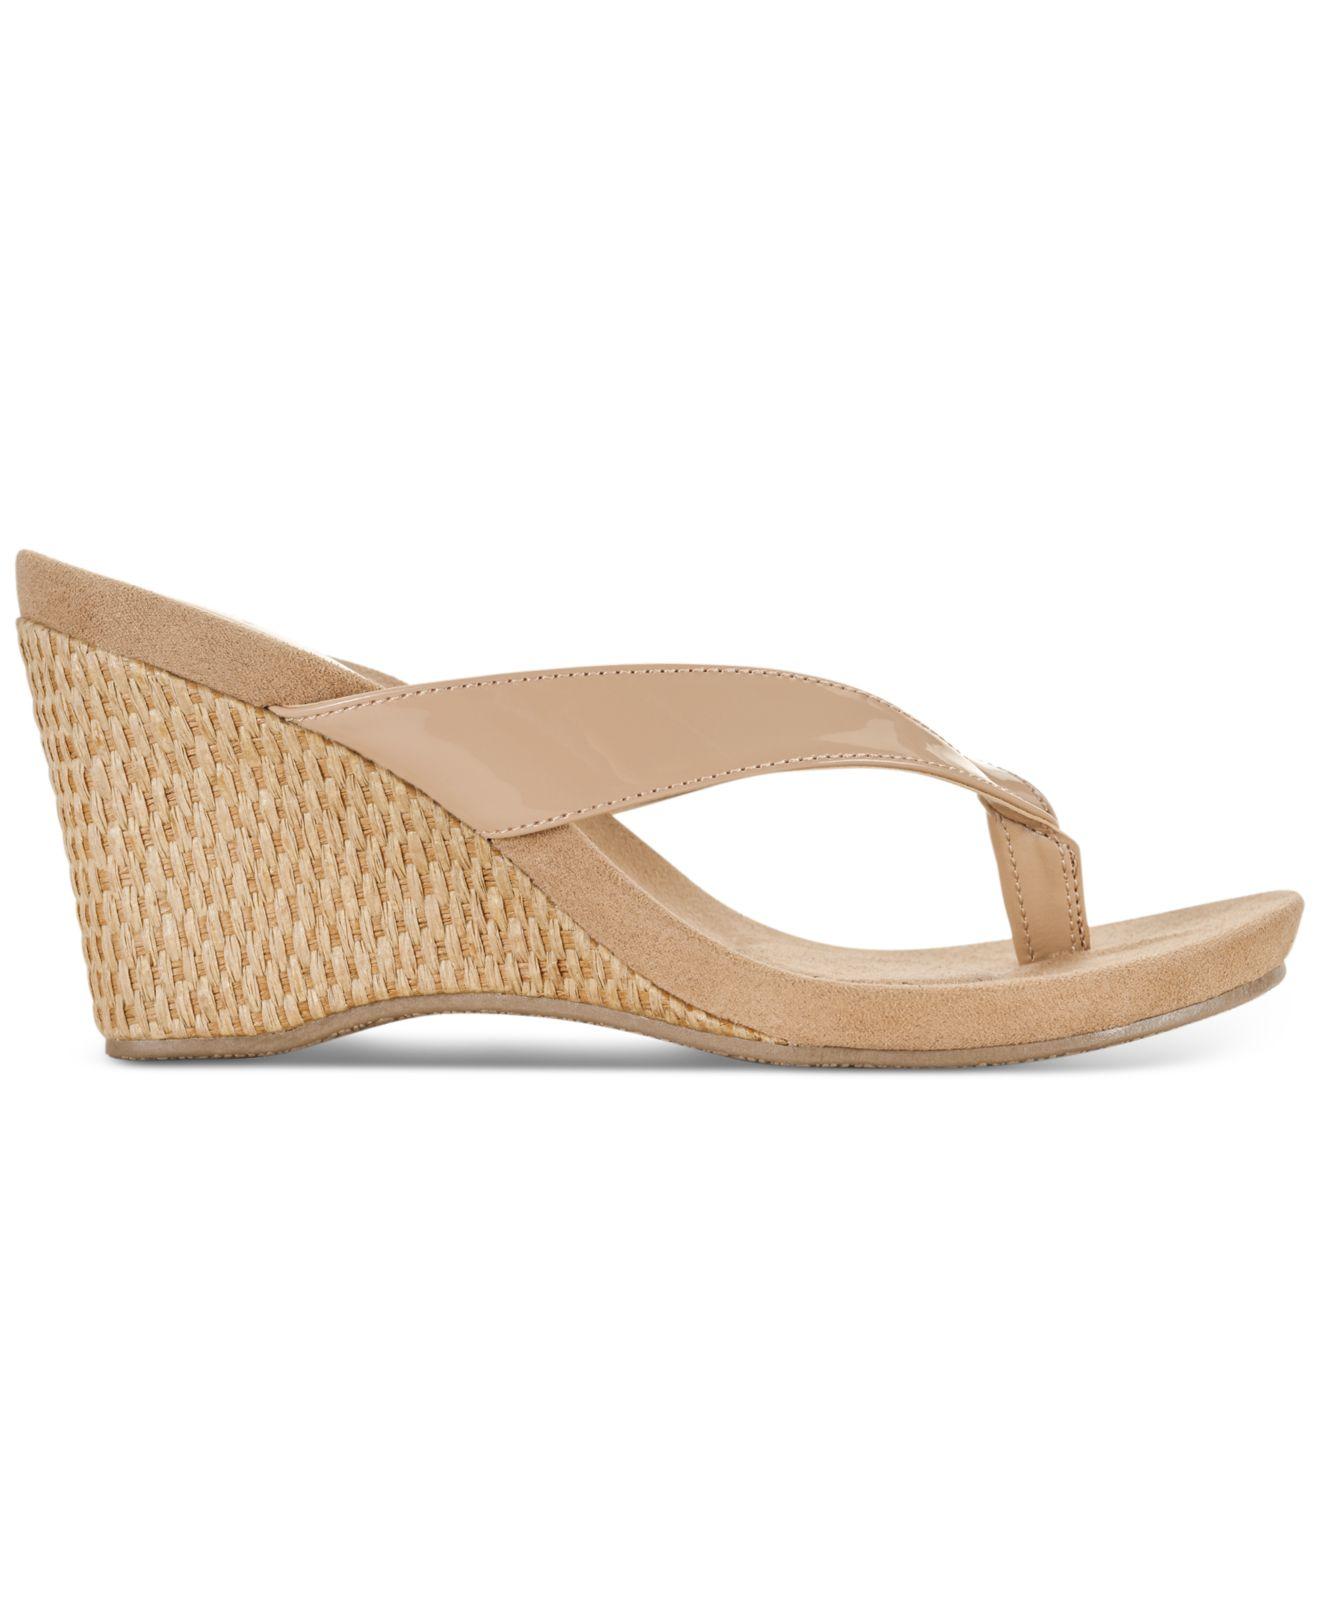 Style & Co. Chicklet Wedge Sandals in Natural